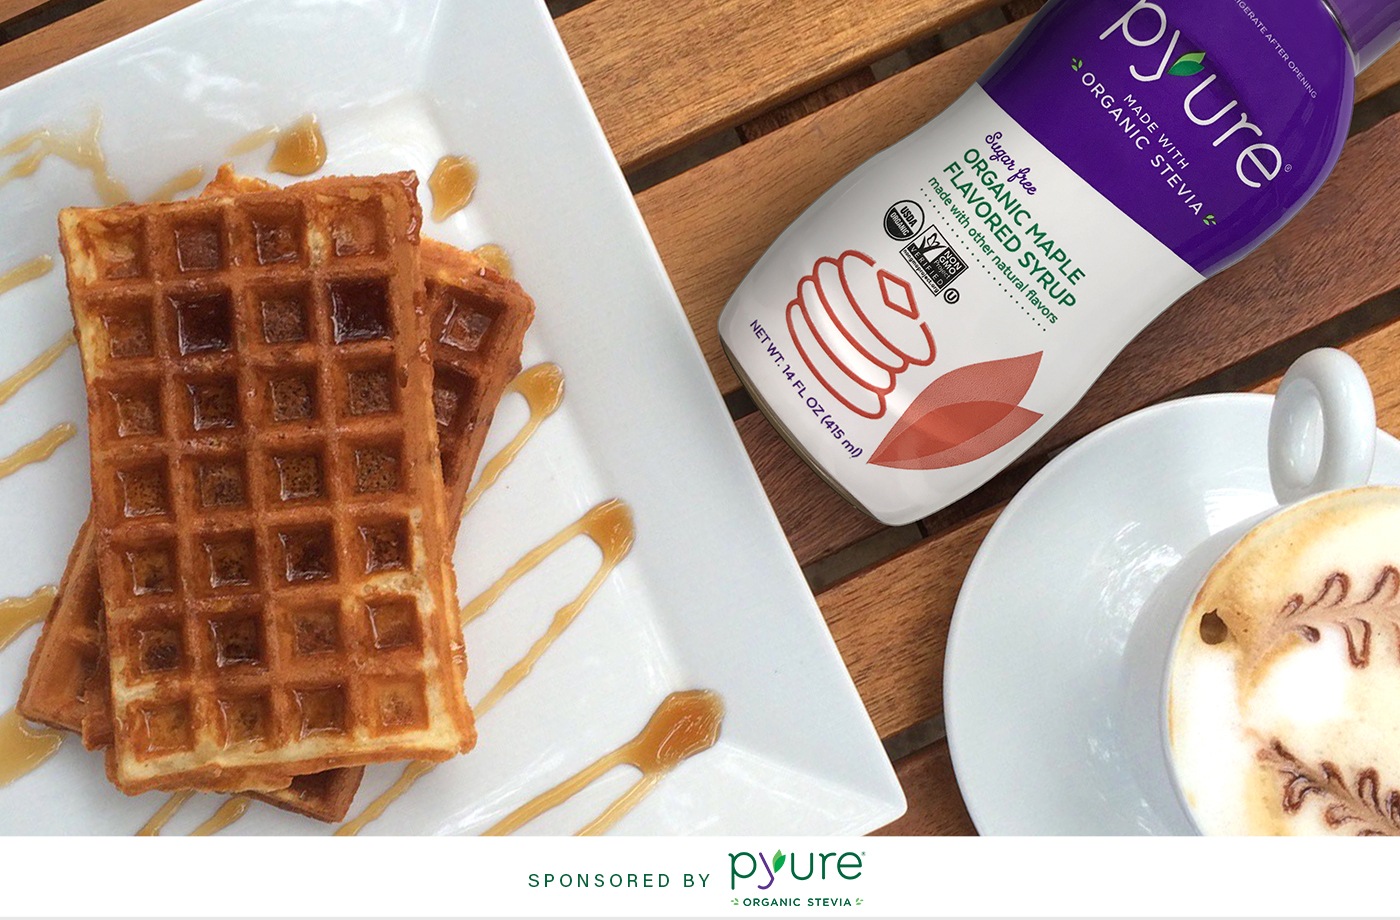 Pyure maple syrup made with stevia